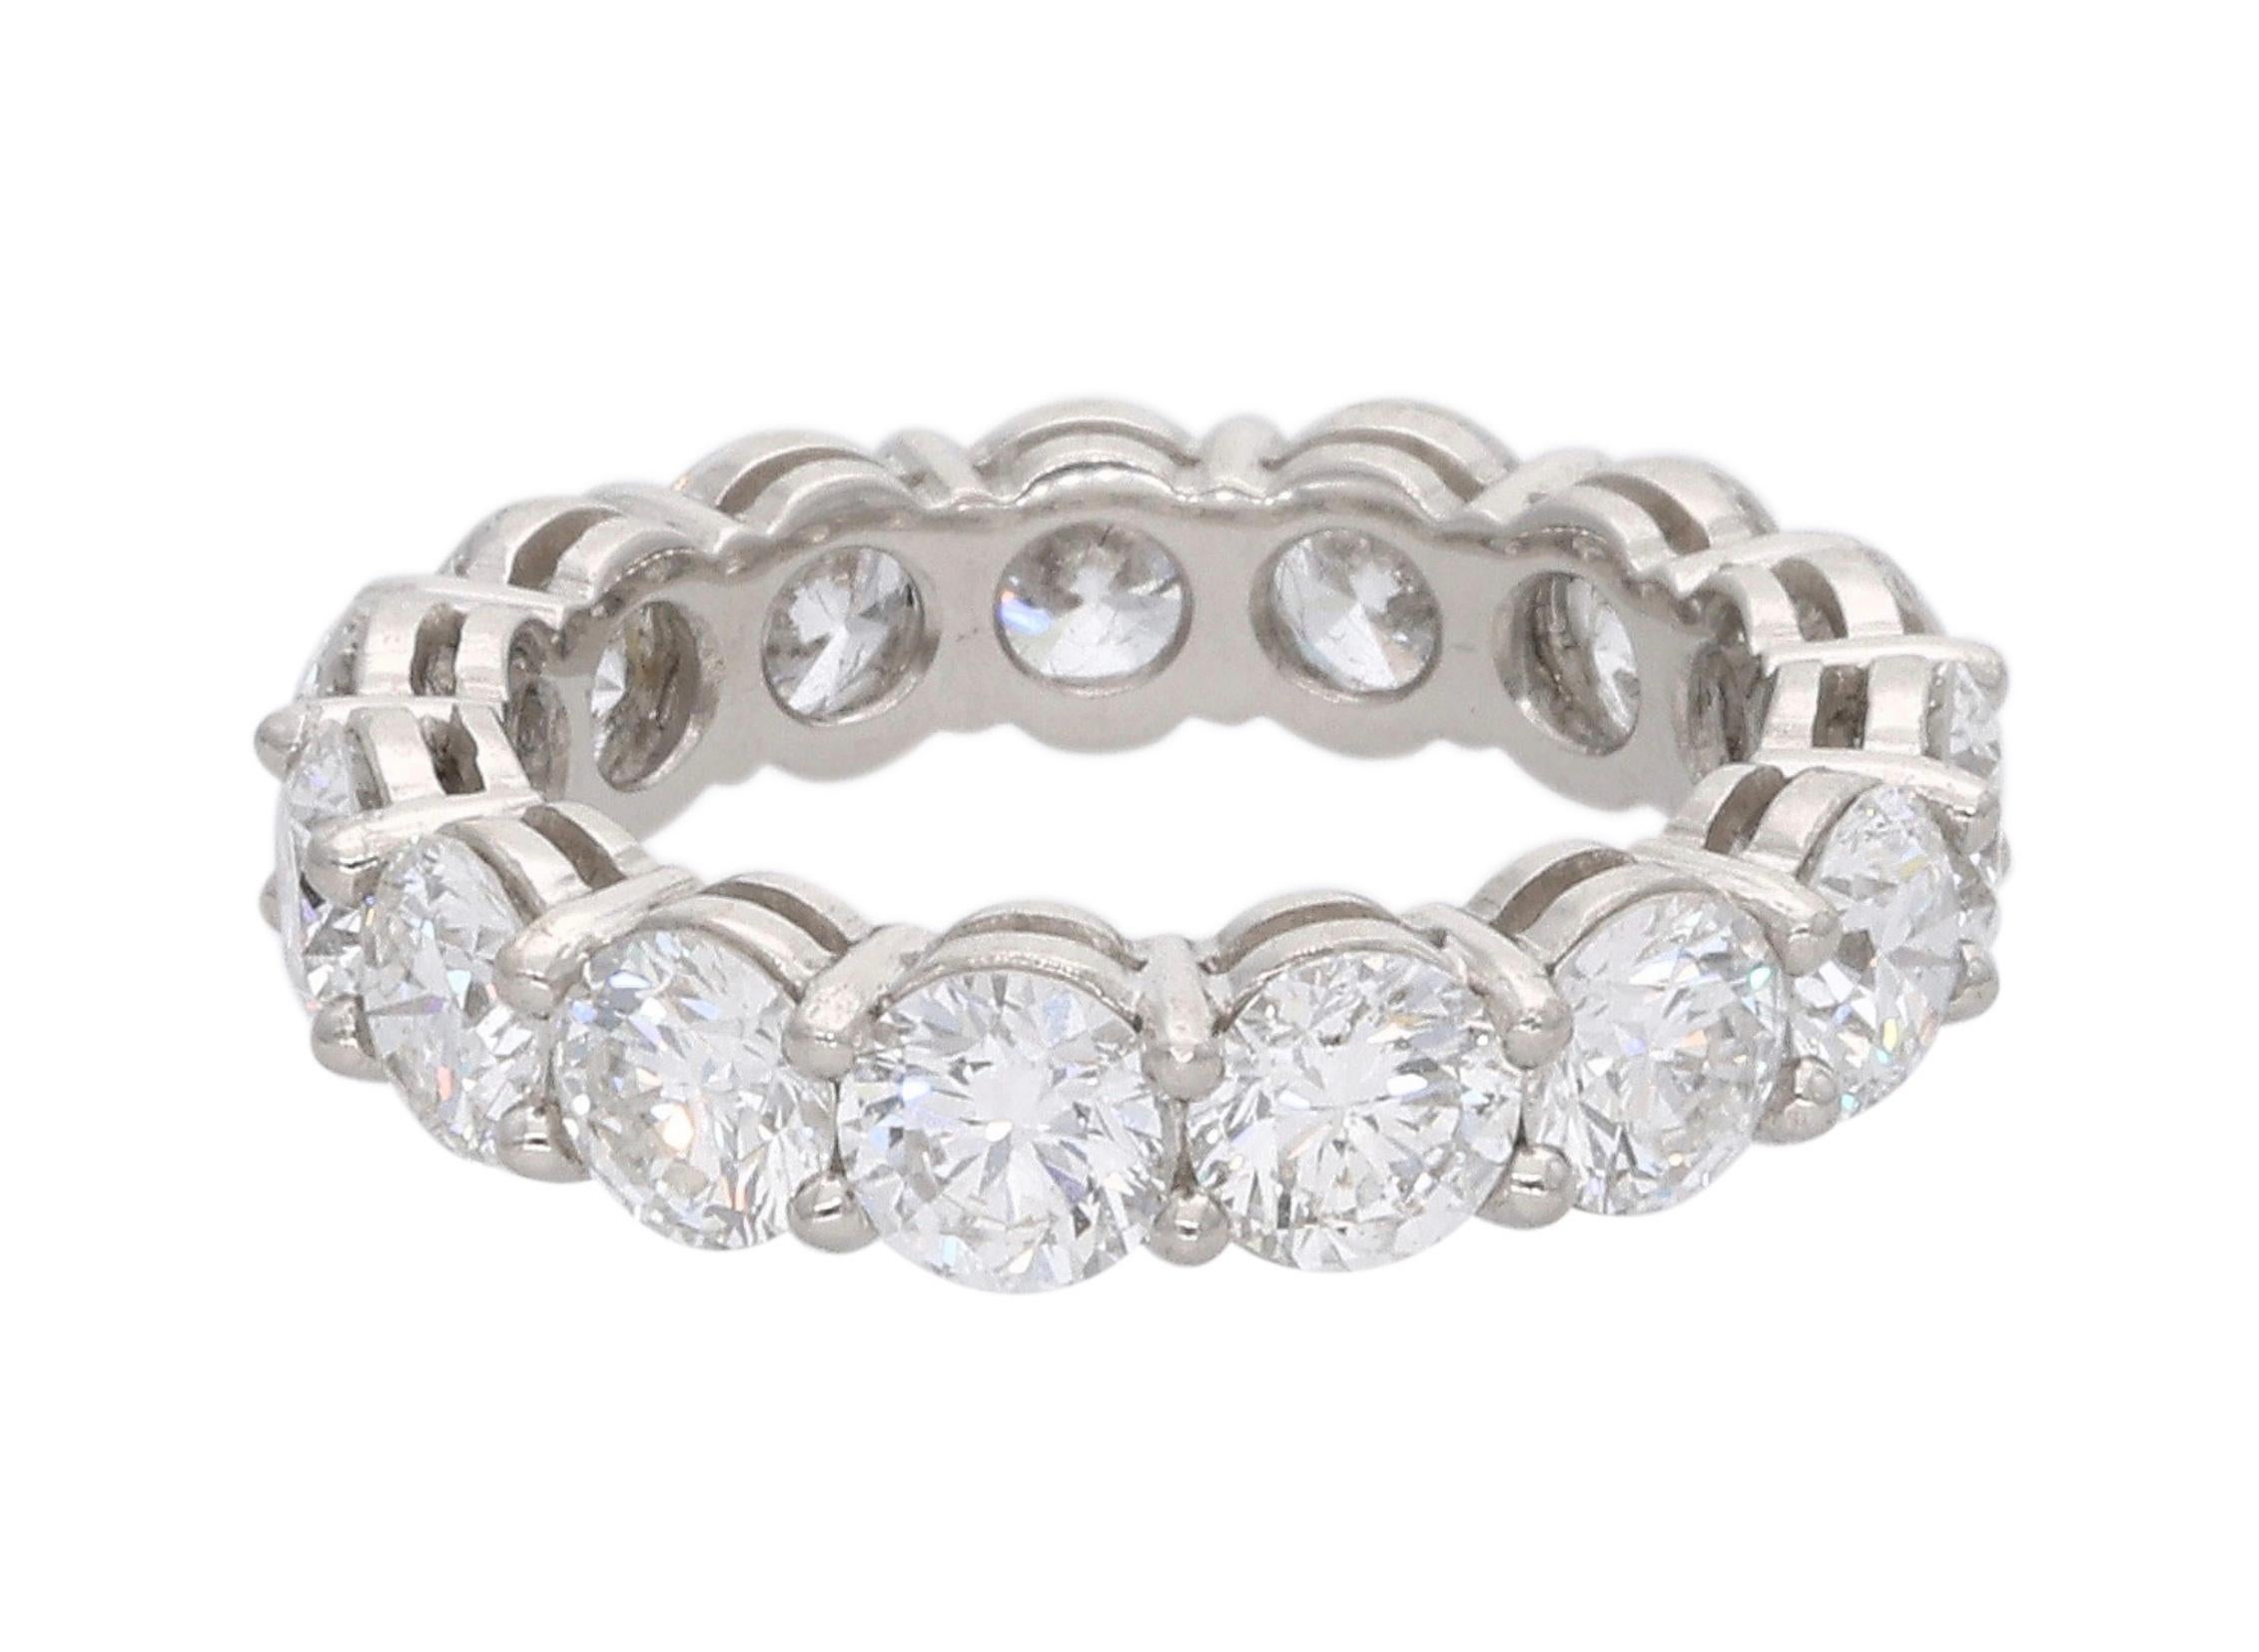 A band ring composed of 15 round brilliant cut diamonds.

- Diamonds weigh a total of approximately 3.75 carats
- 18 karat white gold
- Total weight 5 grams
- Size 4.75

The condition report is Very Good. 

Perfect for any occasion. 